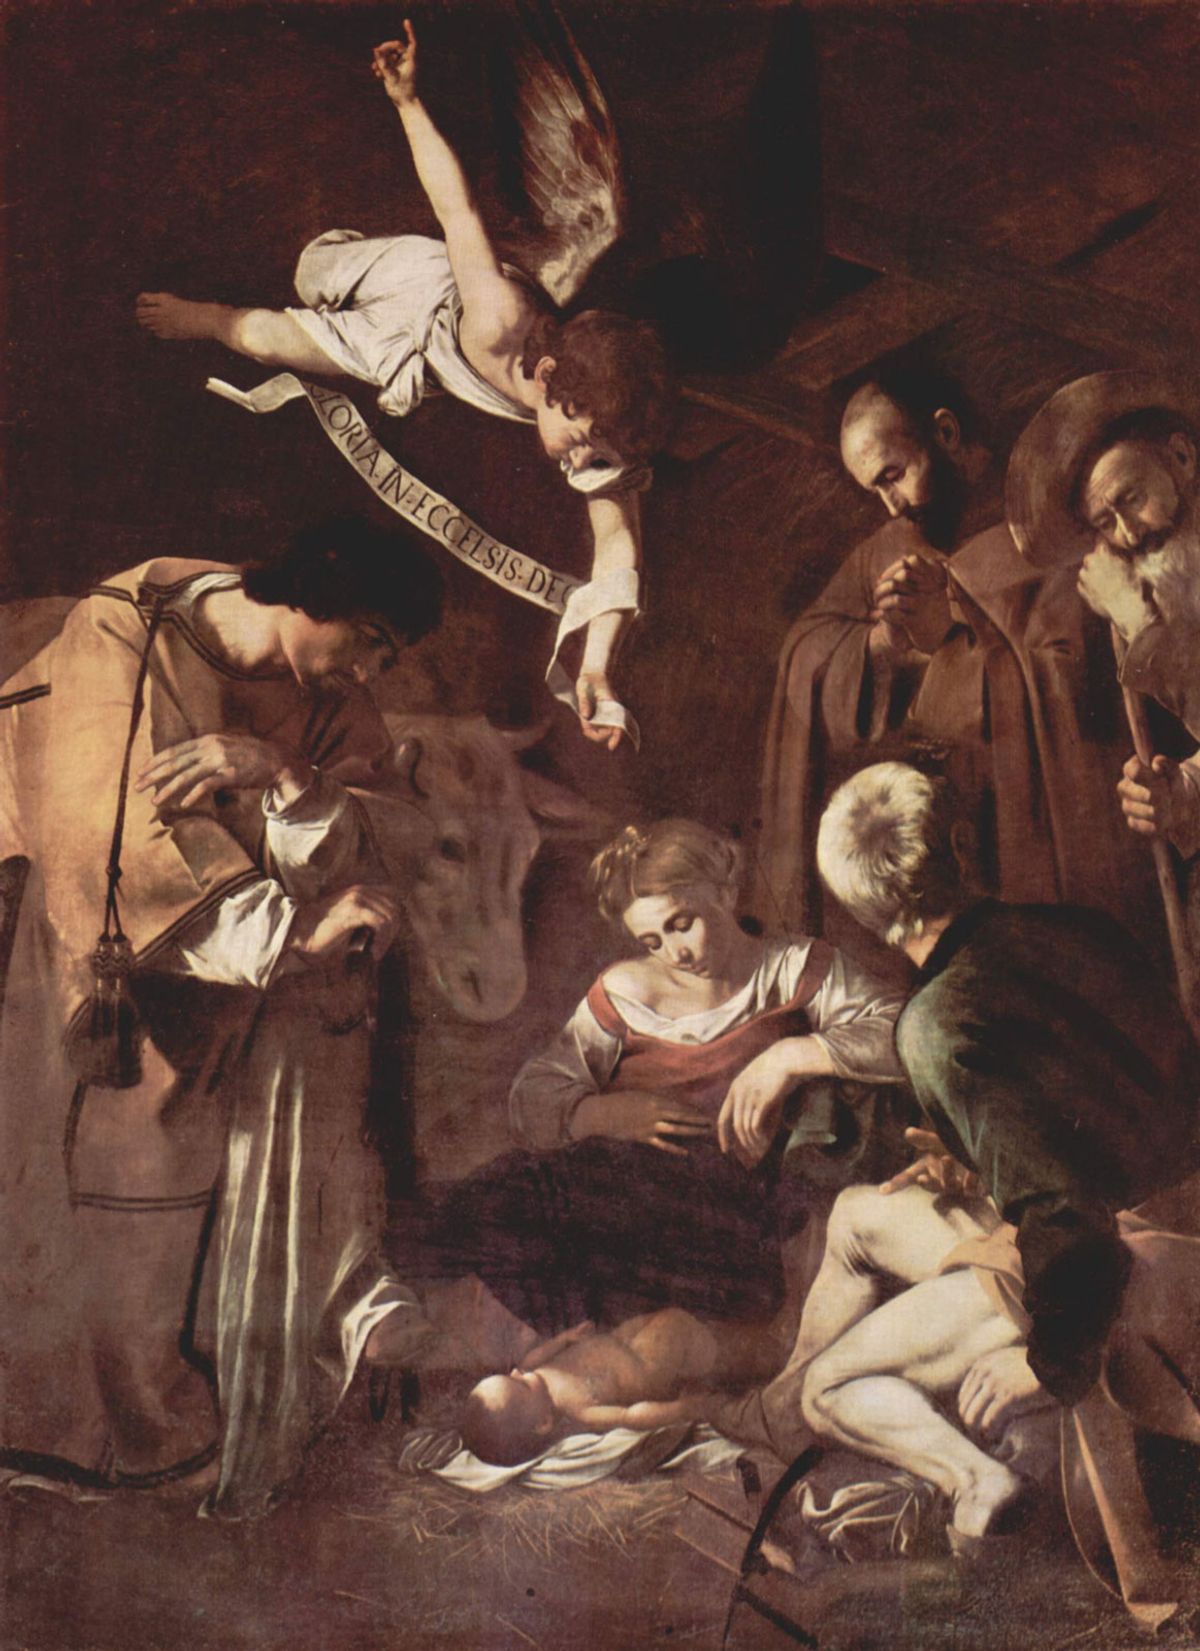 Caravaggio, Nativity with St. Francis and St. Lawrence (1600) Wikimedia Commons